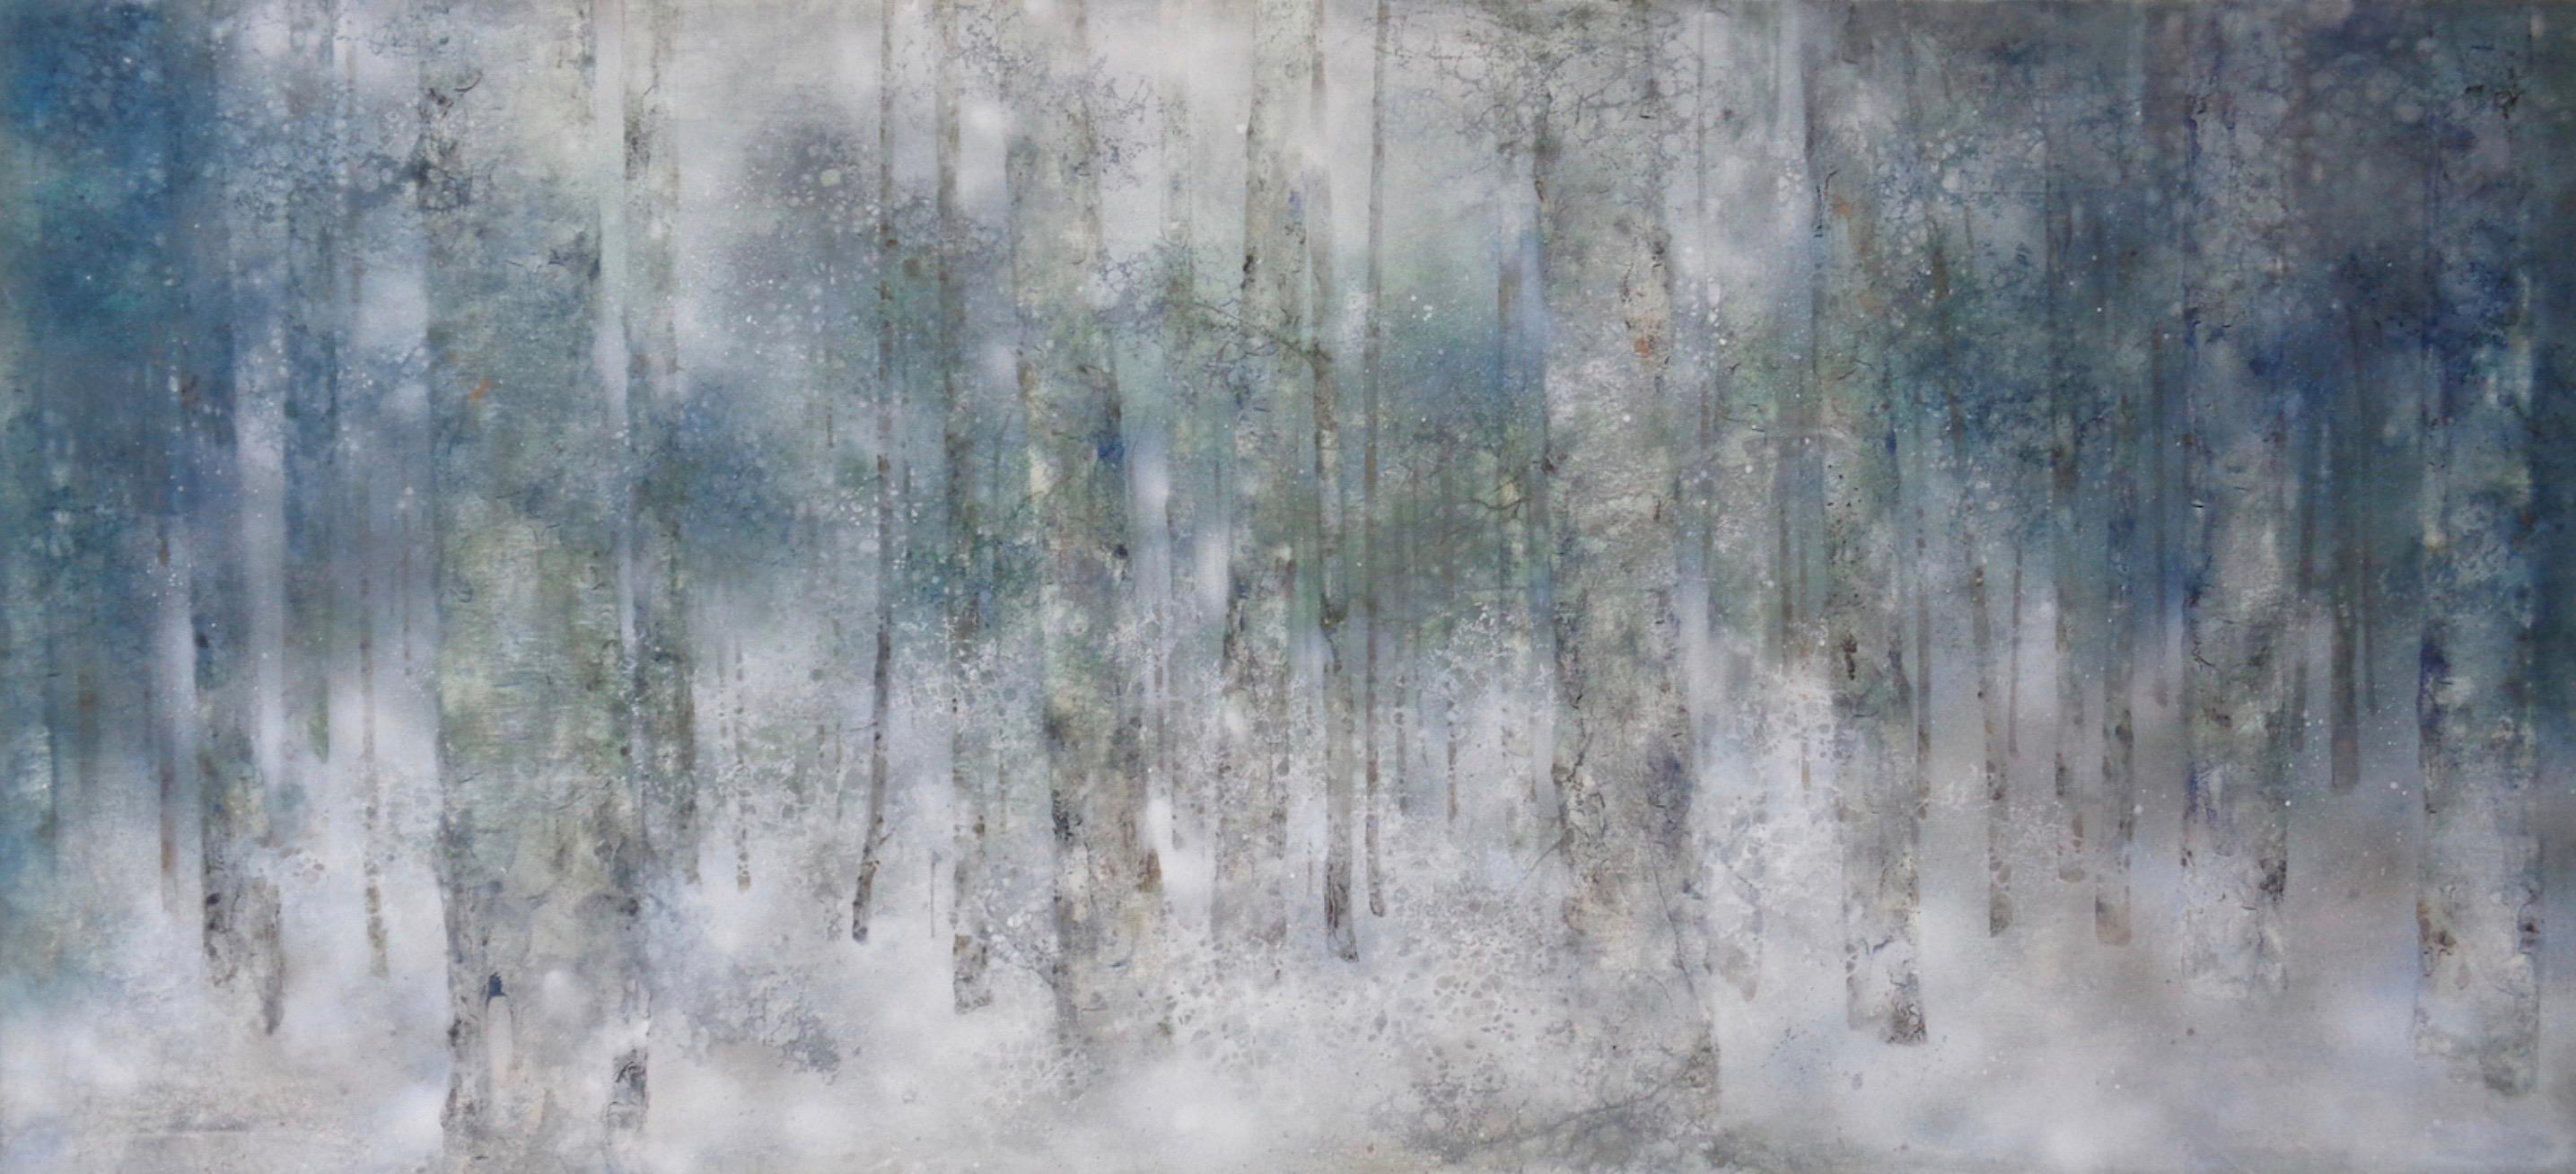 Plenitude II by CHEN Yiching - Nihonga landscape painting, forest